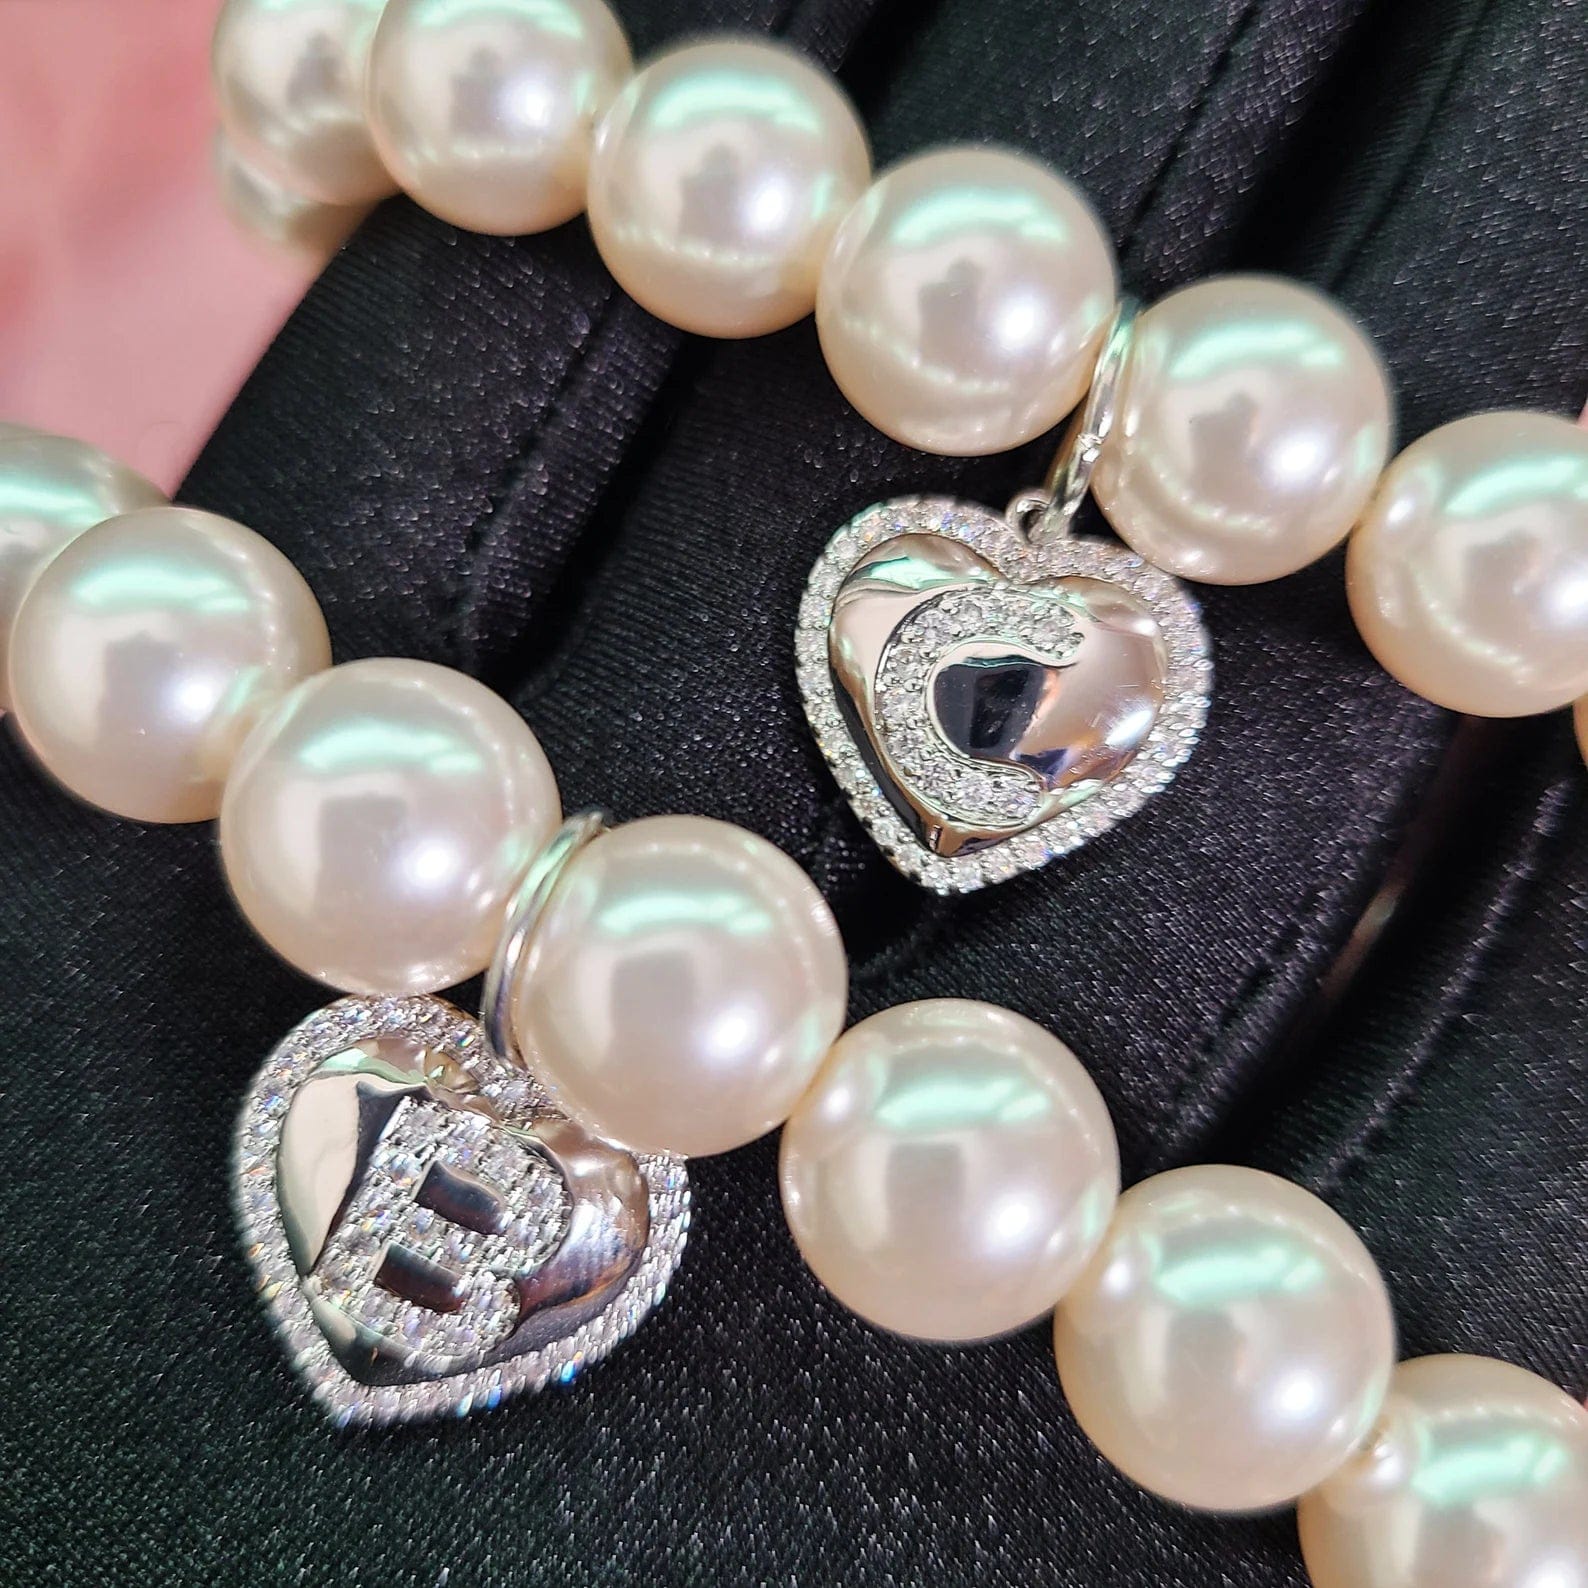 ‘Mother of Pearl’ Customized Necklace or Bracelet Bracelets by Bling Addict | BlingxAddict